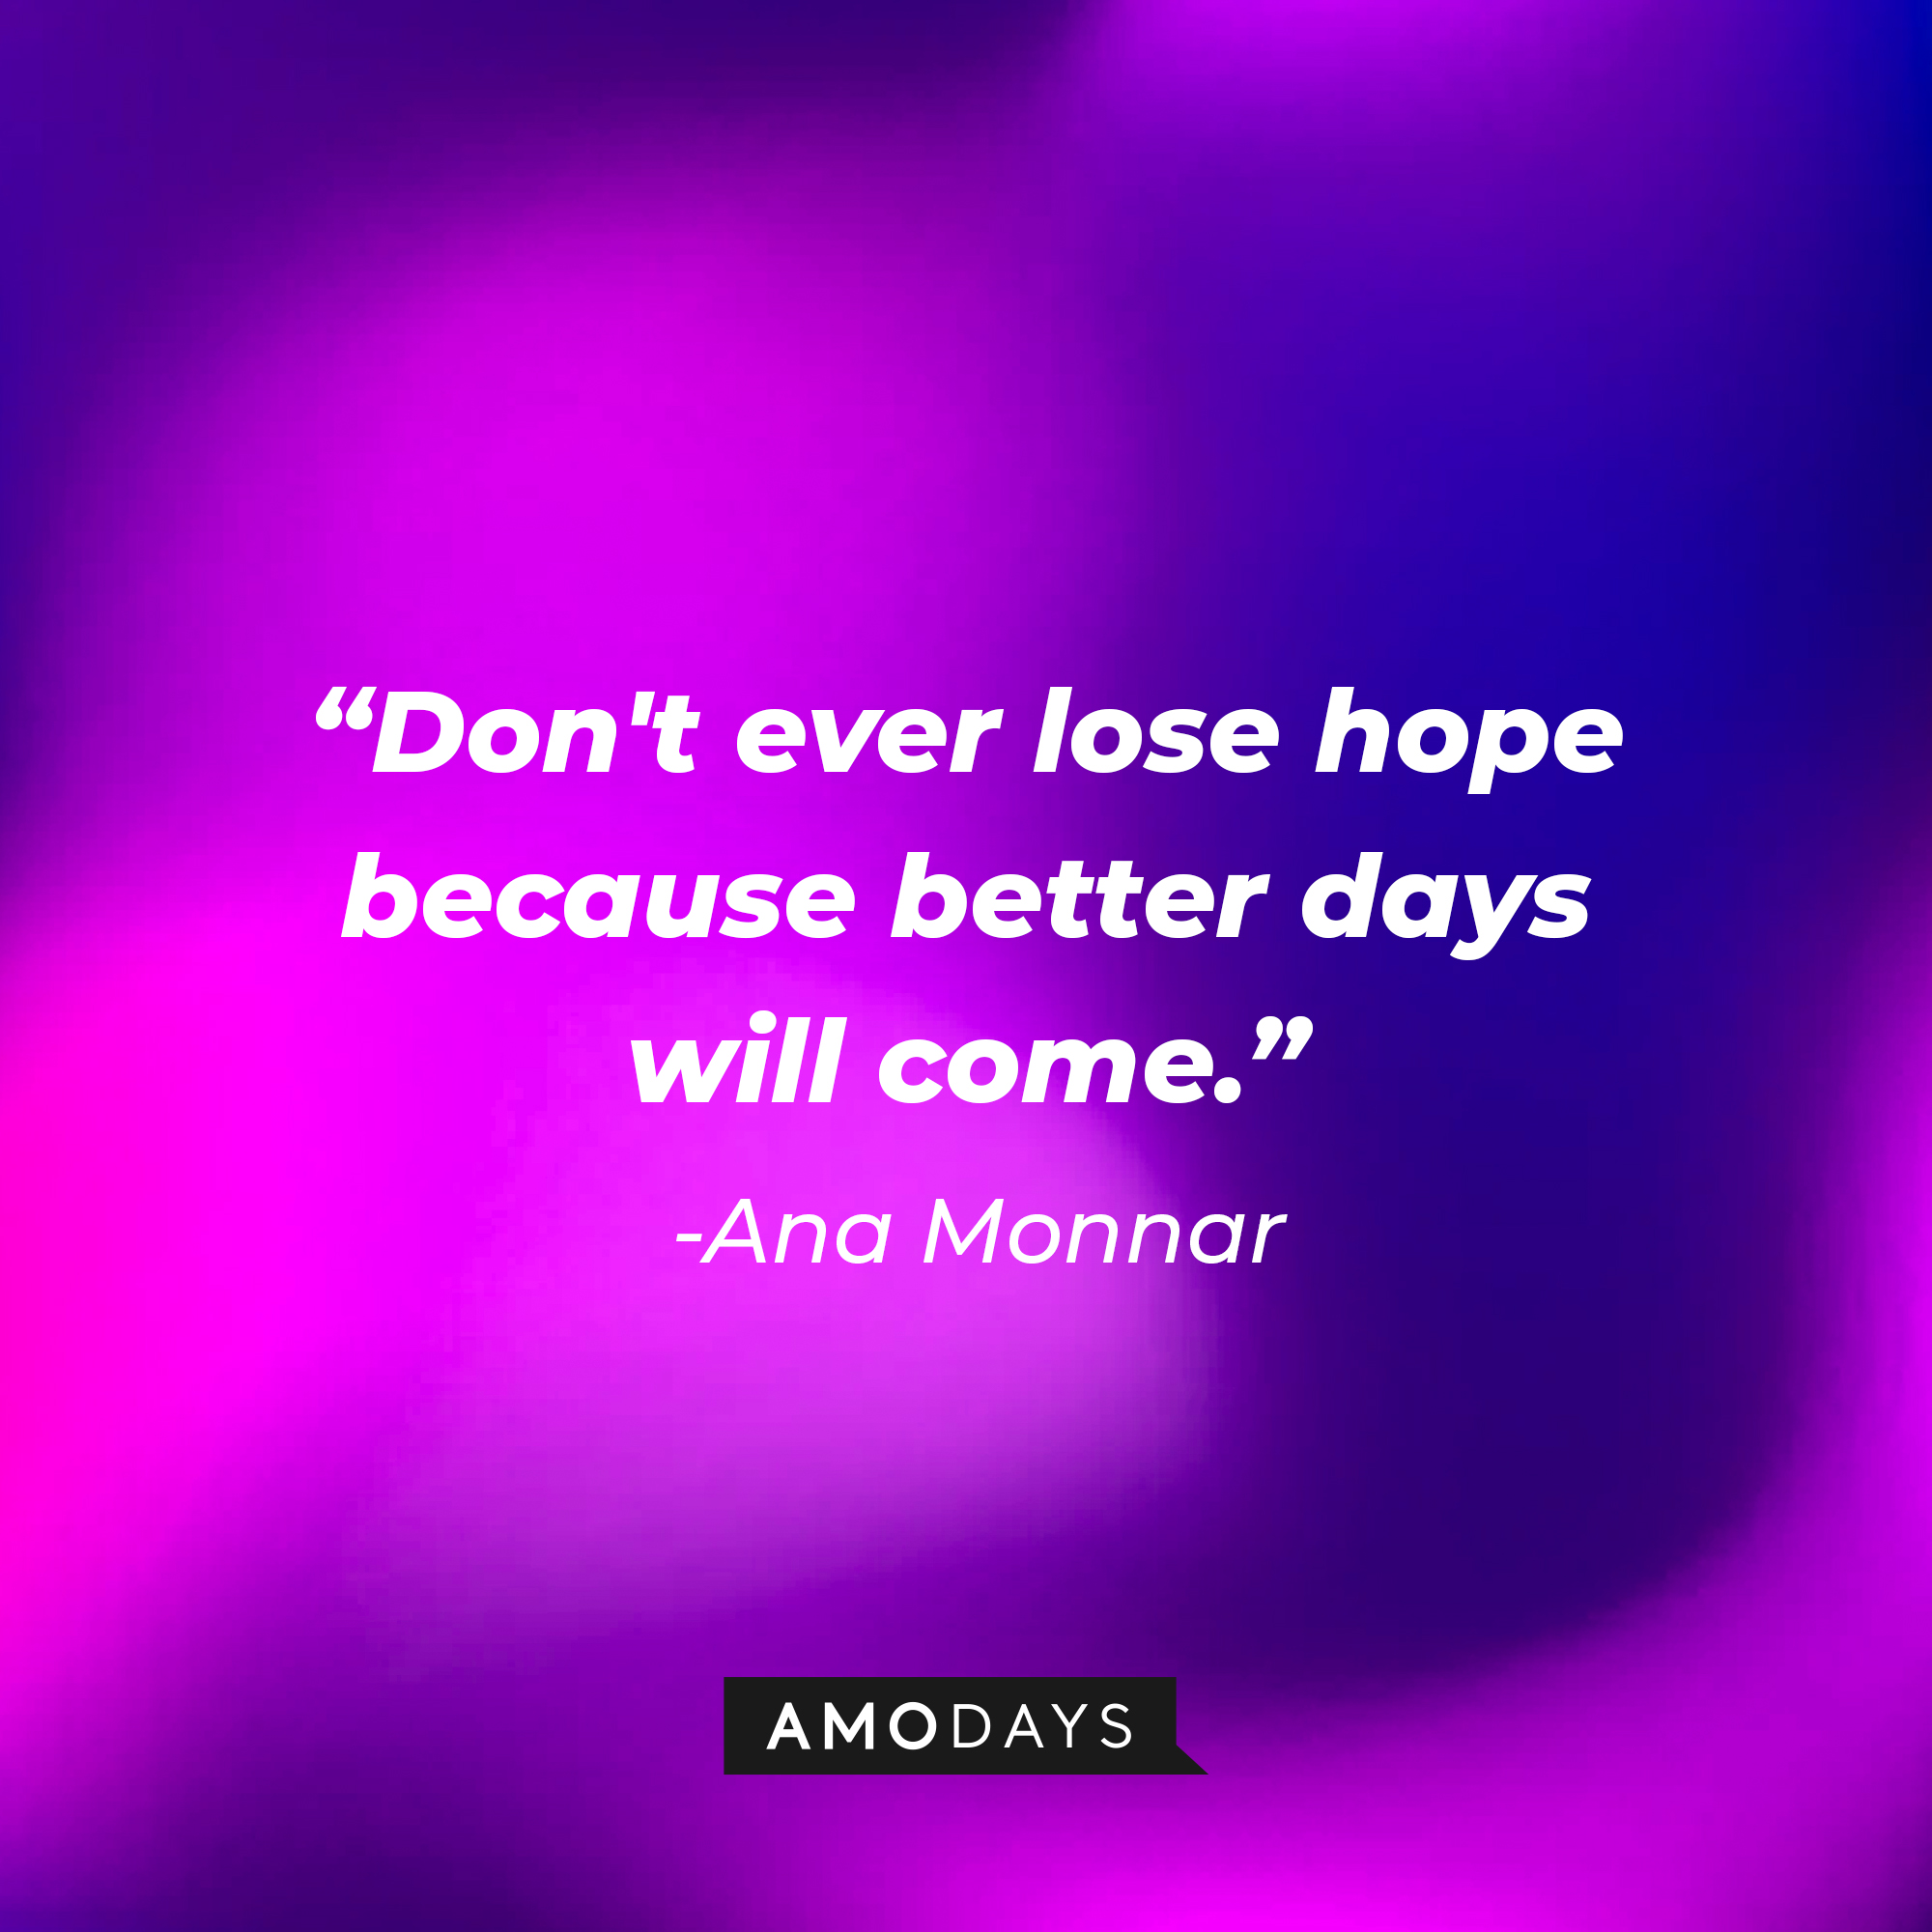 Anna Monnar's quote: "Don't ever lose hope because better days will come." | Image: Amodays